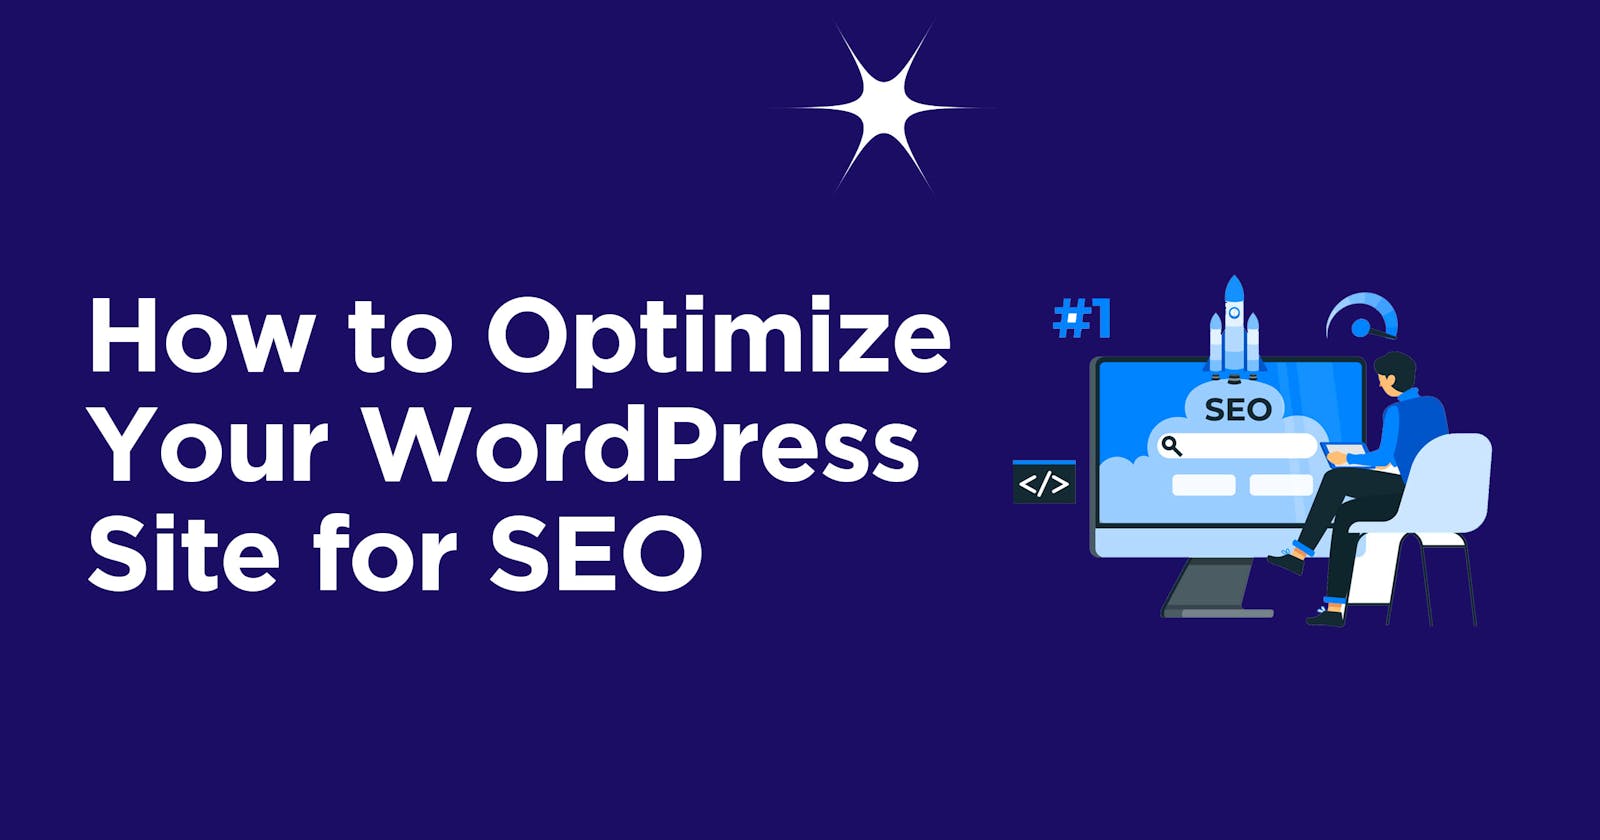 How to Optimize Your WordPress Site for Search Engines